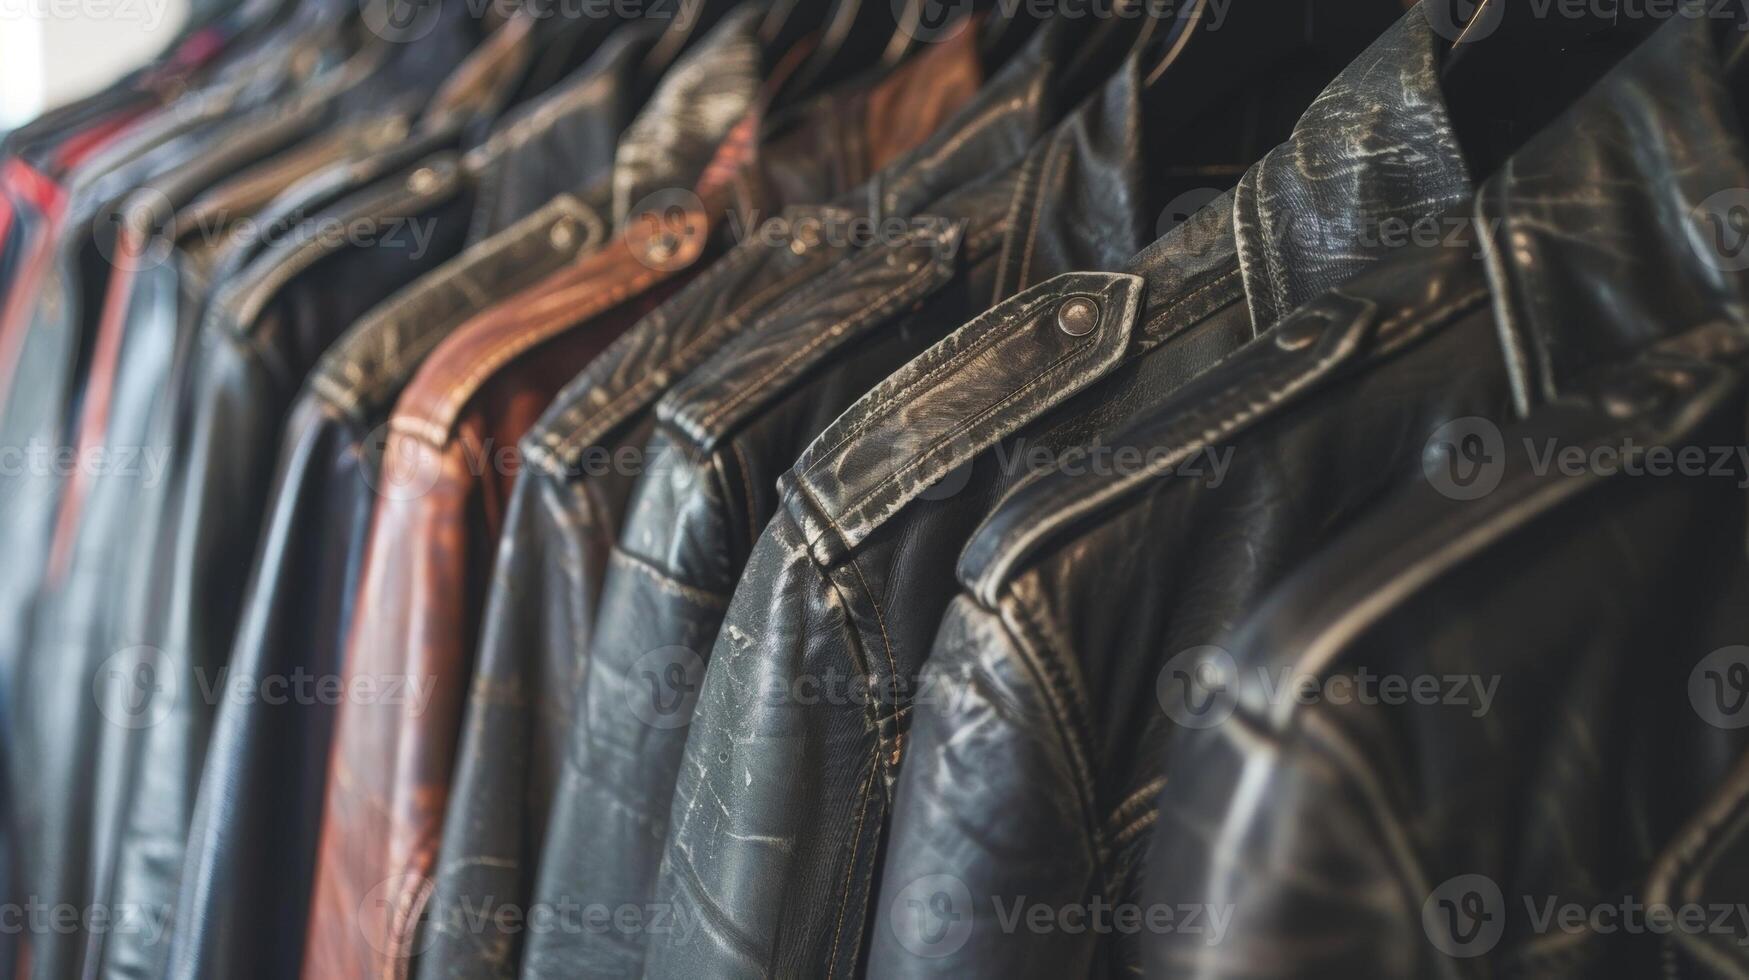 An iconic leather jacket with its effortless cool vibe and perfectly distressed look becomes a wardrobe staple for the finder and a bargain at the thrift store price photo